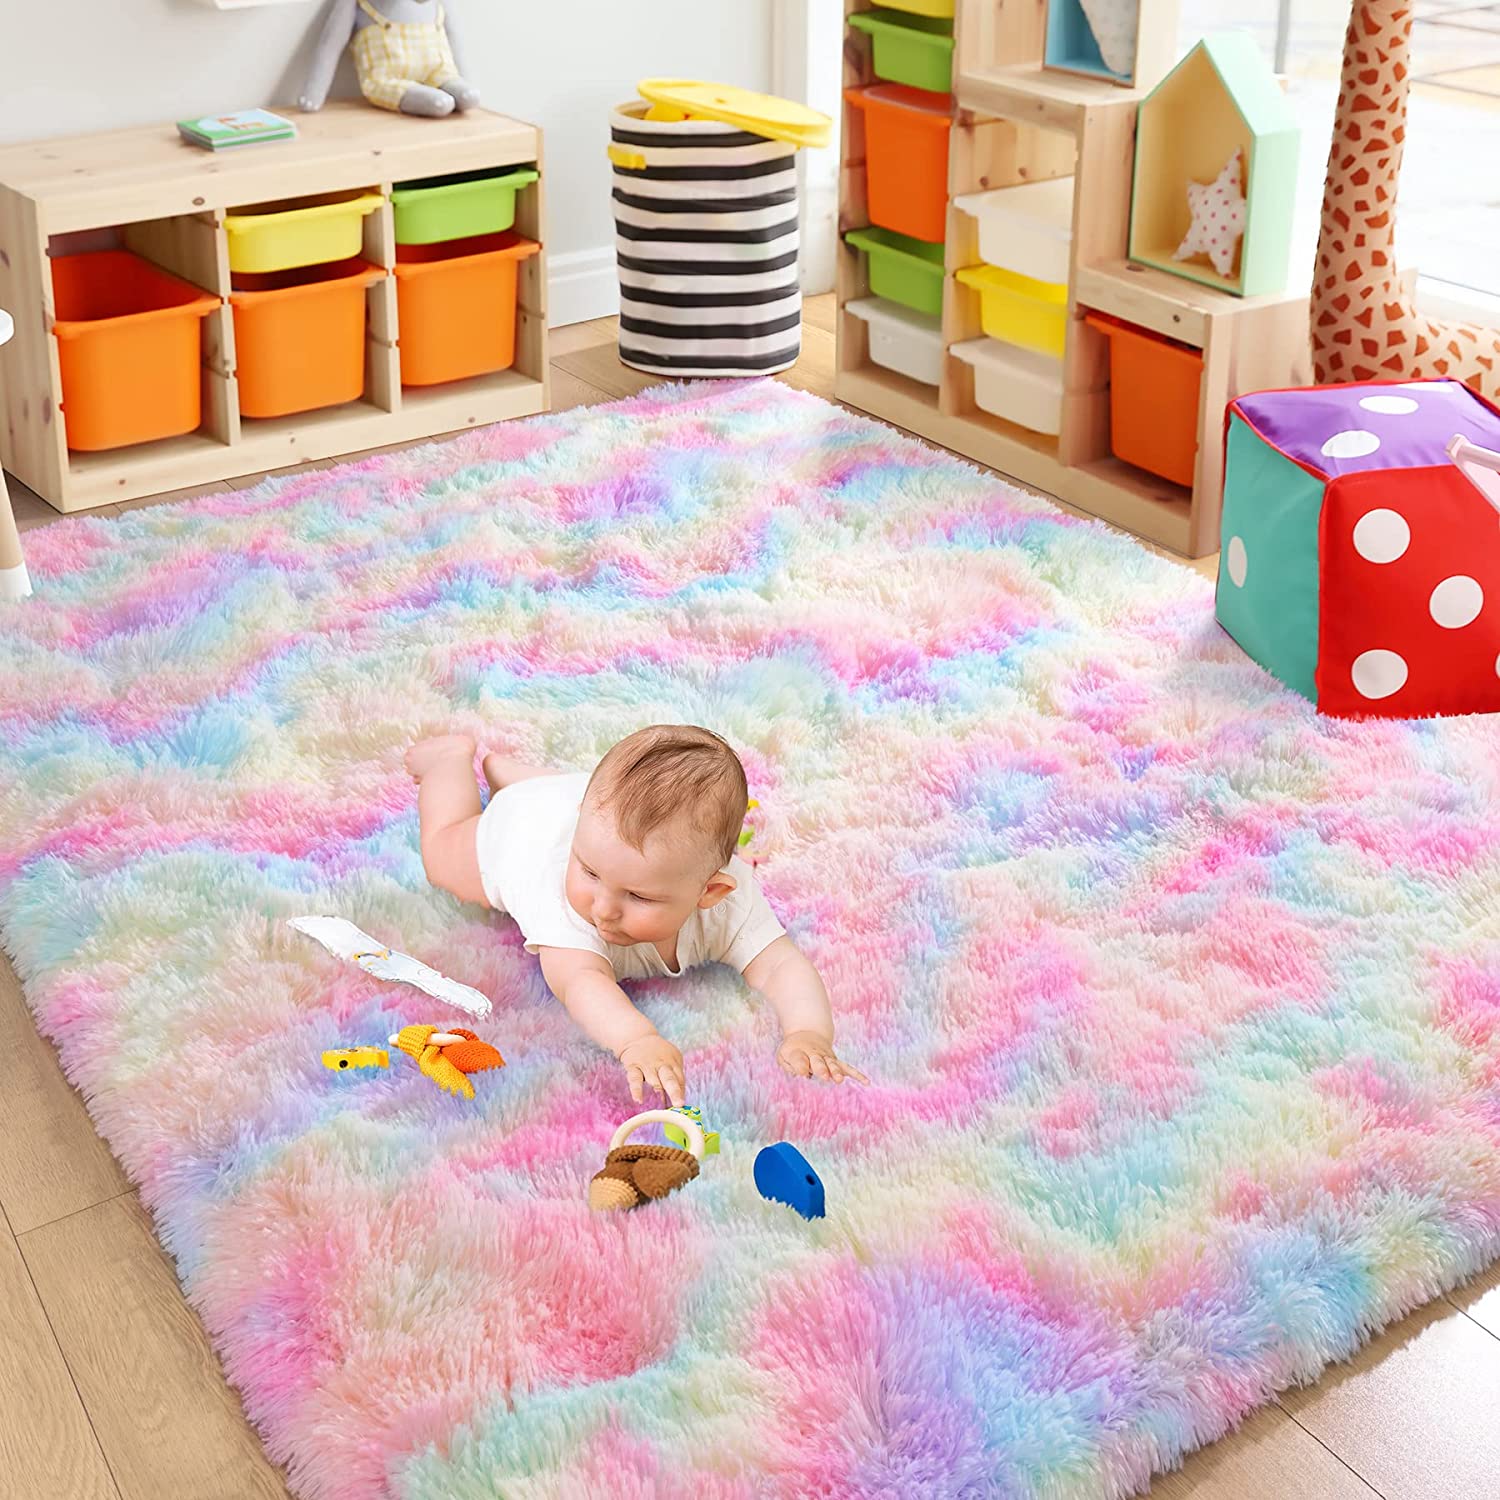 Noahas Super Soft Rainbow Rugs Area Rugs For Kids, Colorful Shaggy Carpet For Living Room Bedroom Nursery Room, 4'x6' - image 3 of 8